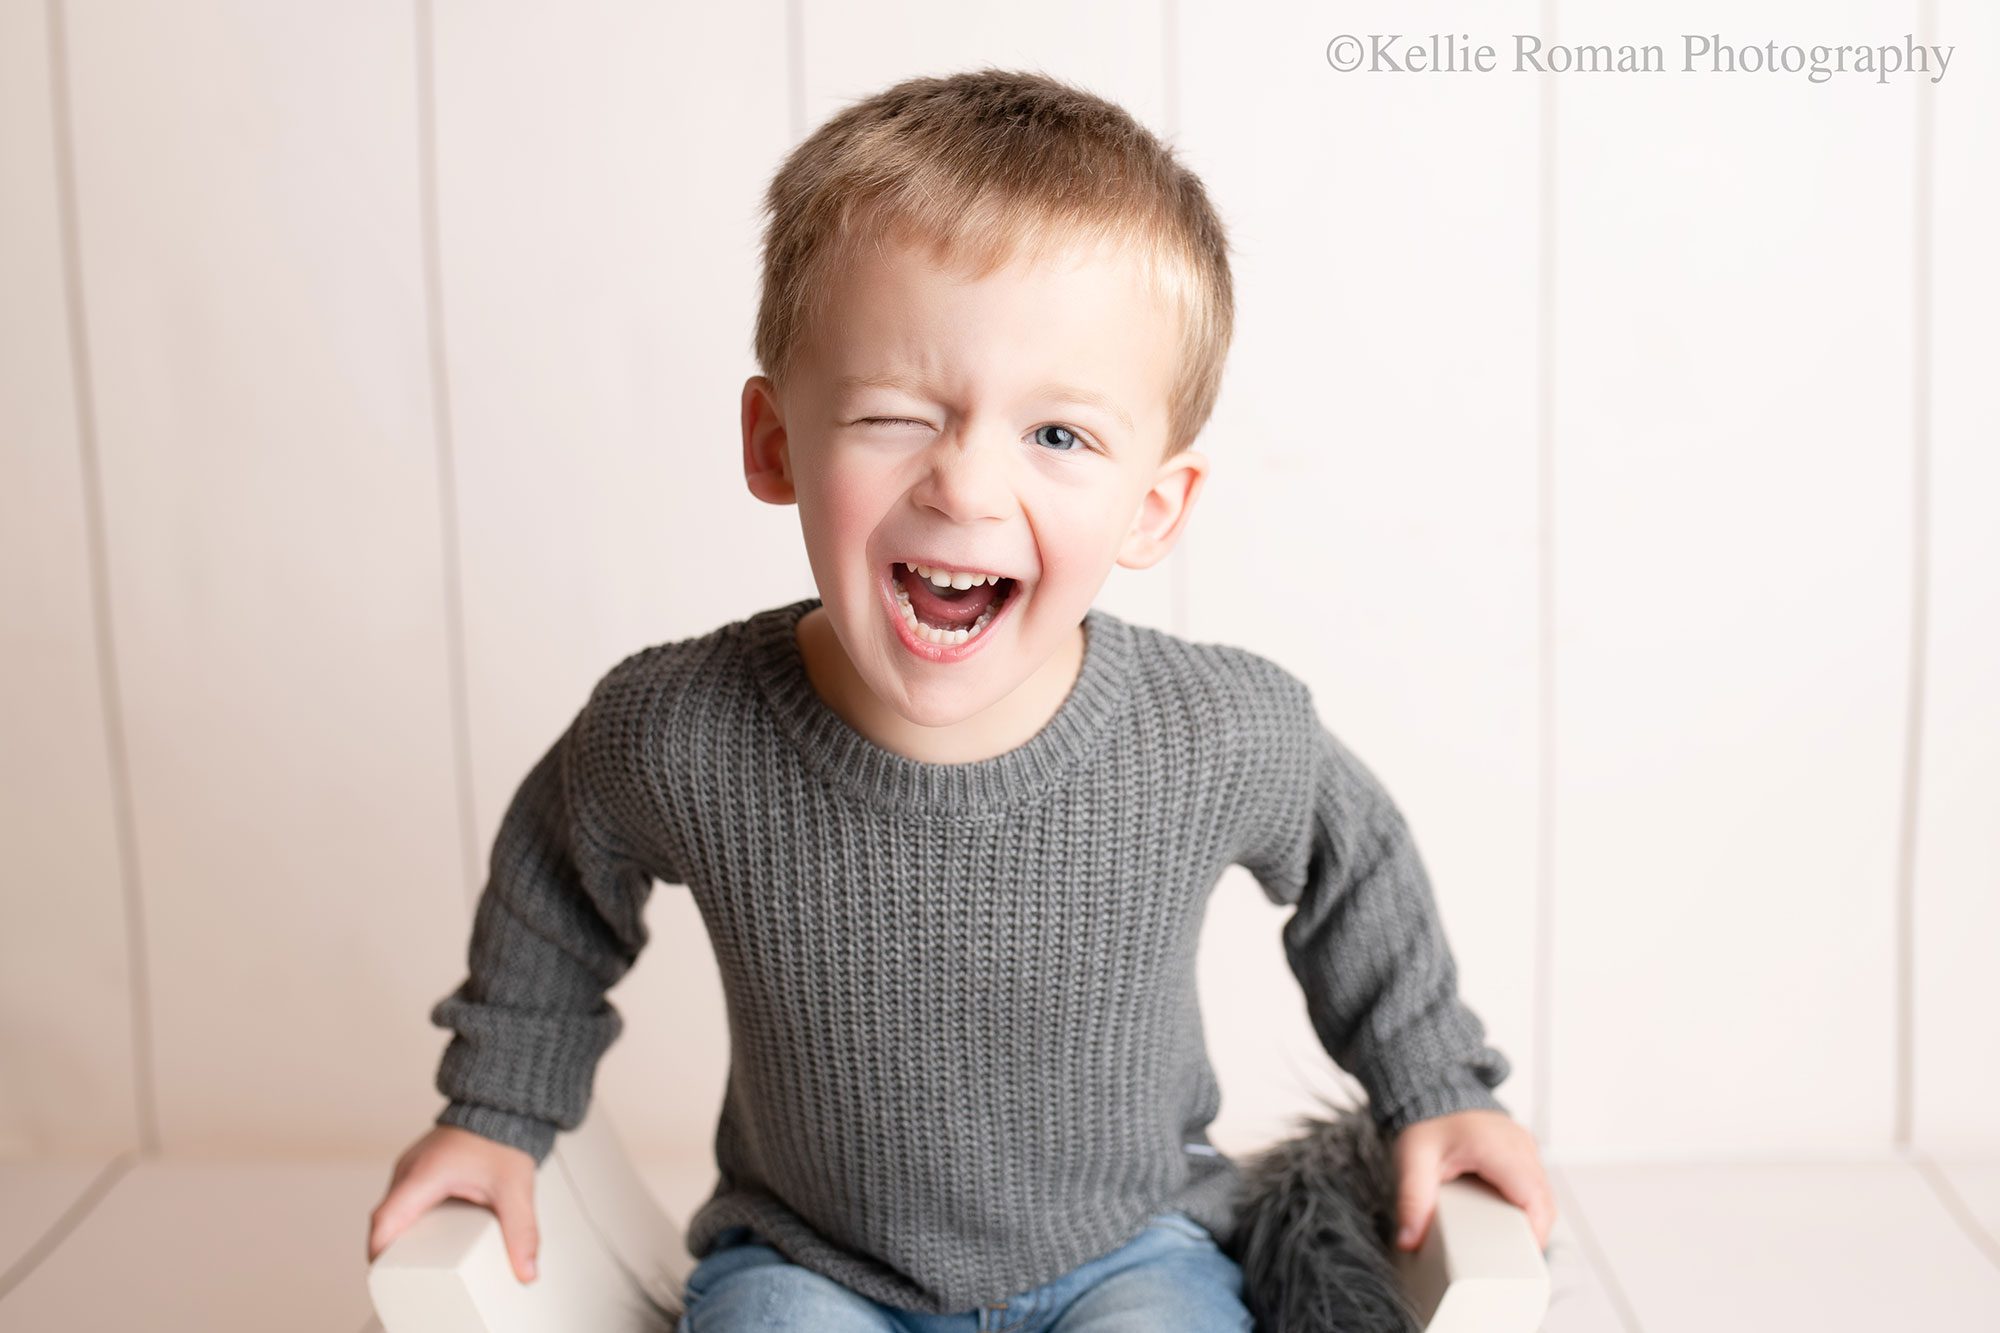 milwaukee child photographer. young boy sitting on a white wood bench and holding onto it. image is a close up of the boy smiling and winking at the camera. he has a grey knit sweater on and has blonde hair. the backdrop is cream, striped.